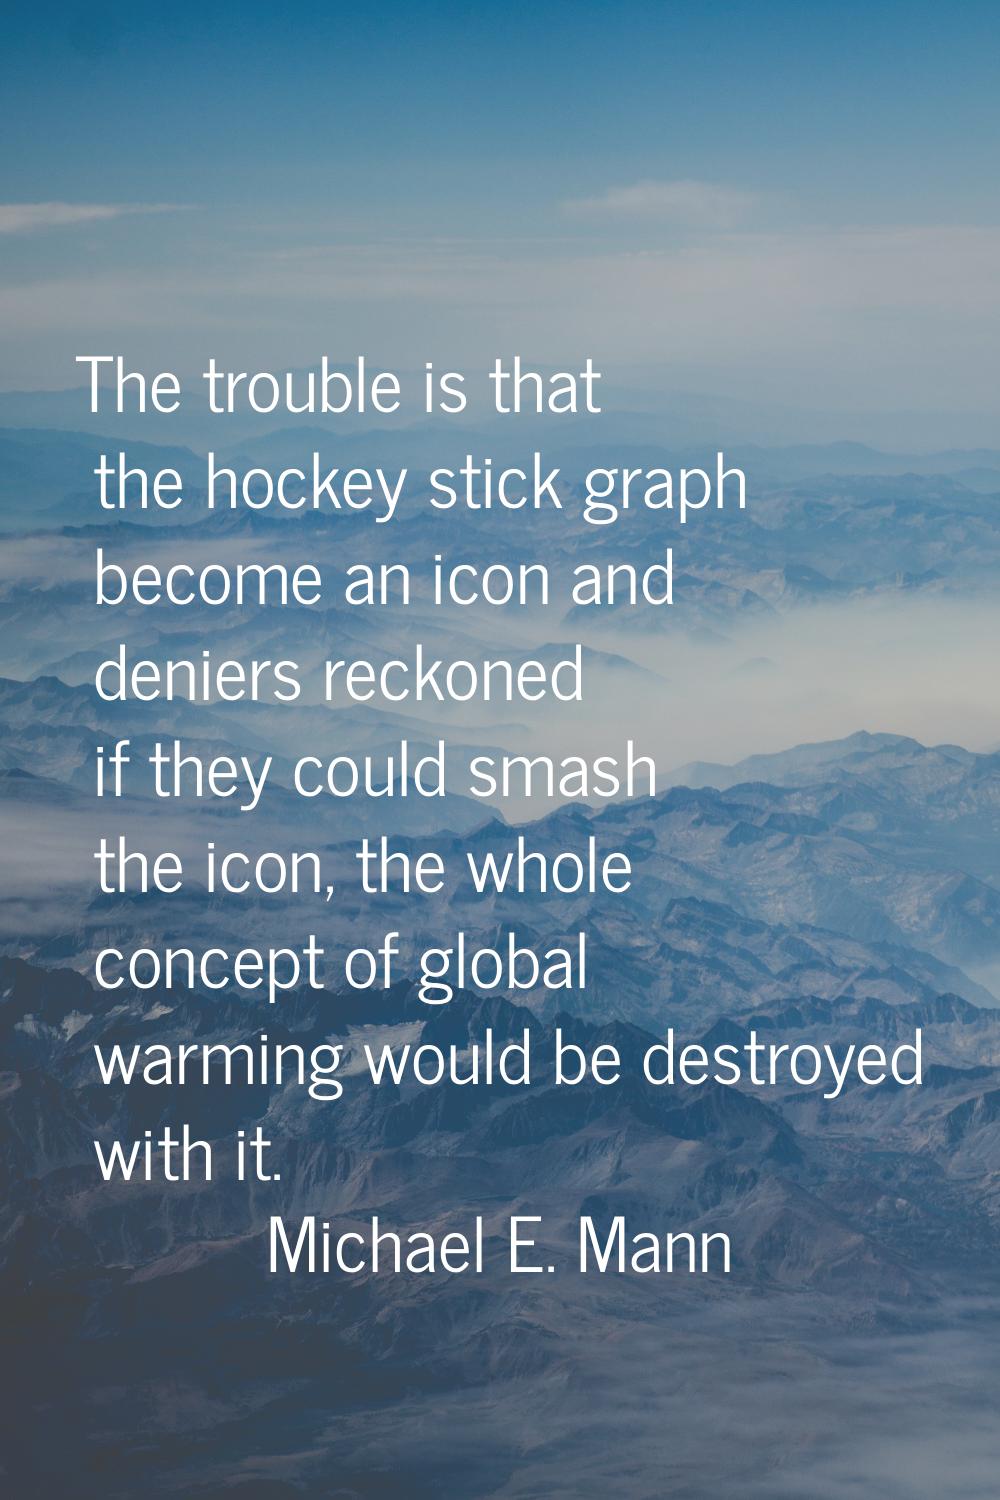 The trouble is that the hockey stick graph become an icon and deniers reckoned if they could smash 